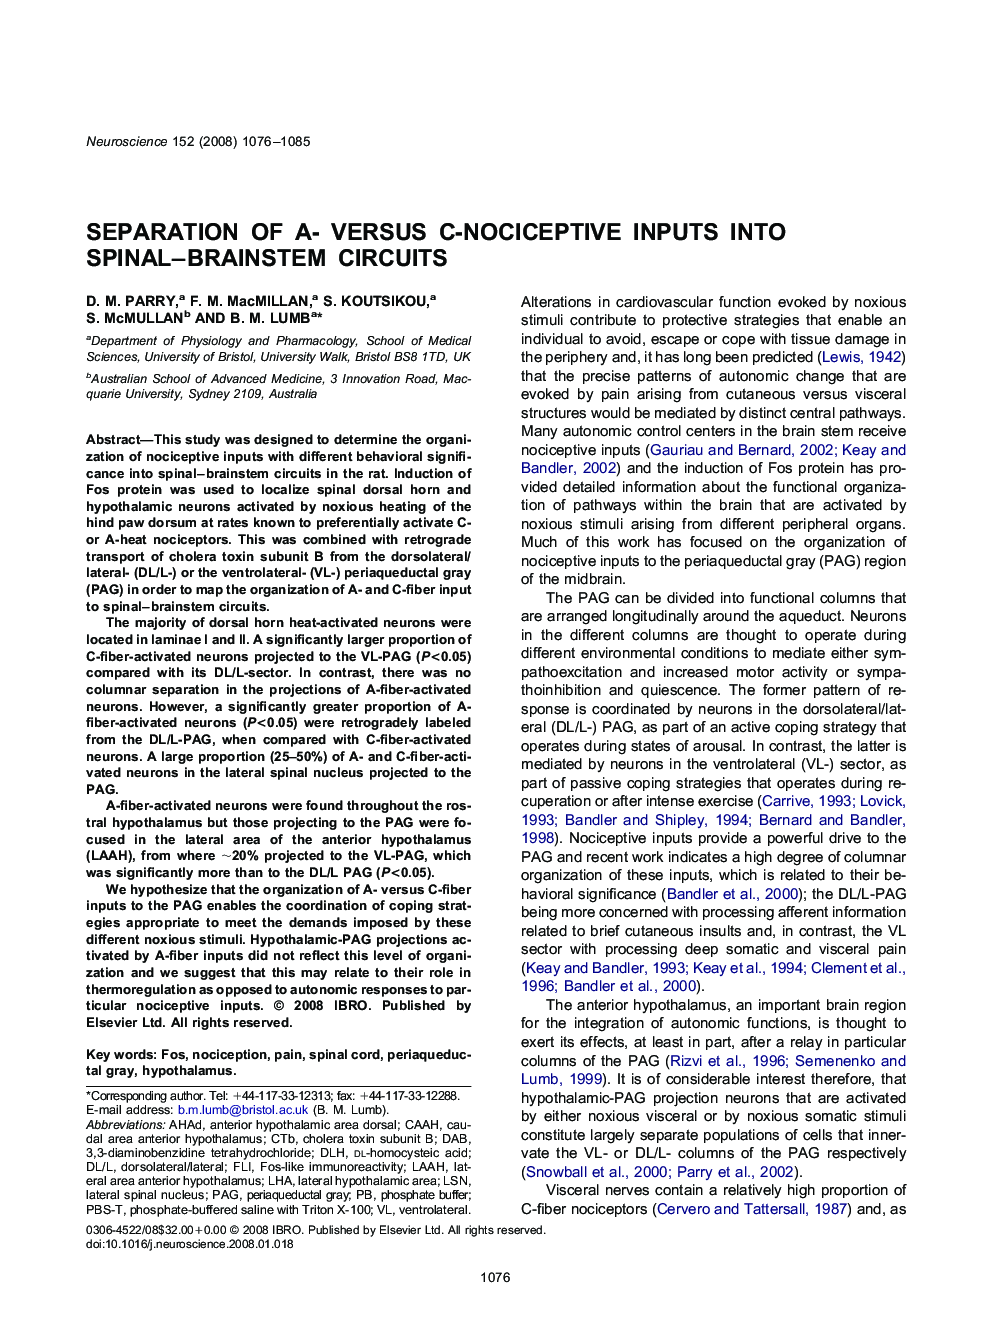 Separation of A- versus C-nociceptive inputs into spinal-brainstem circuits